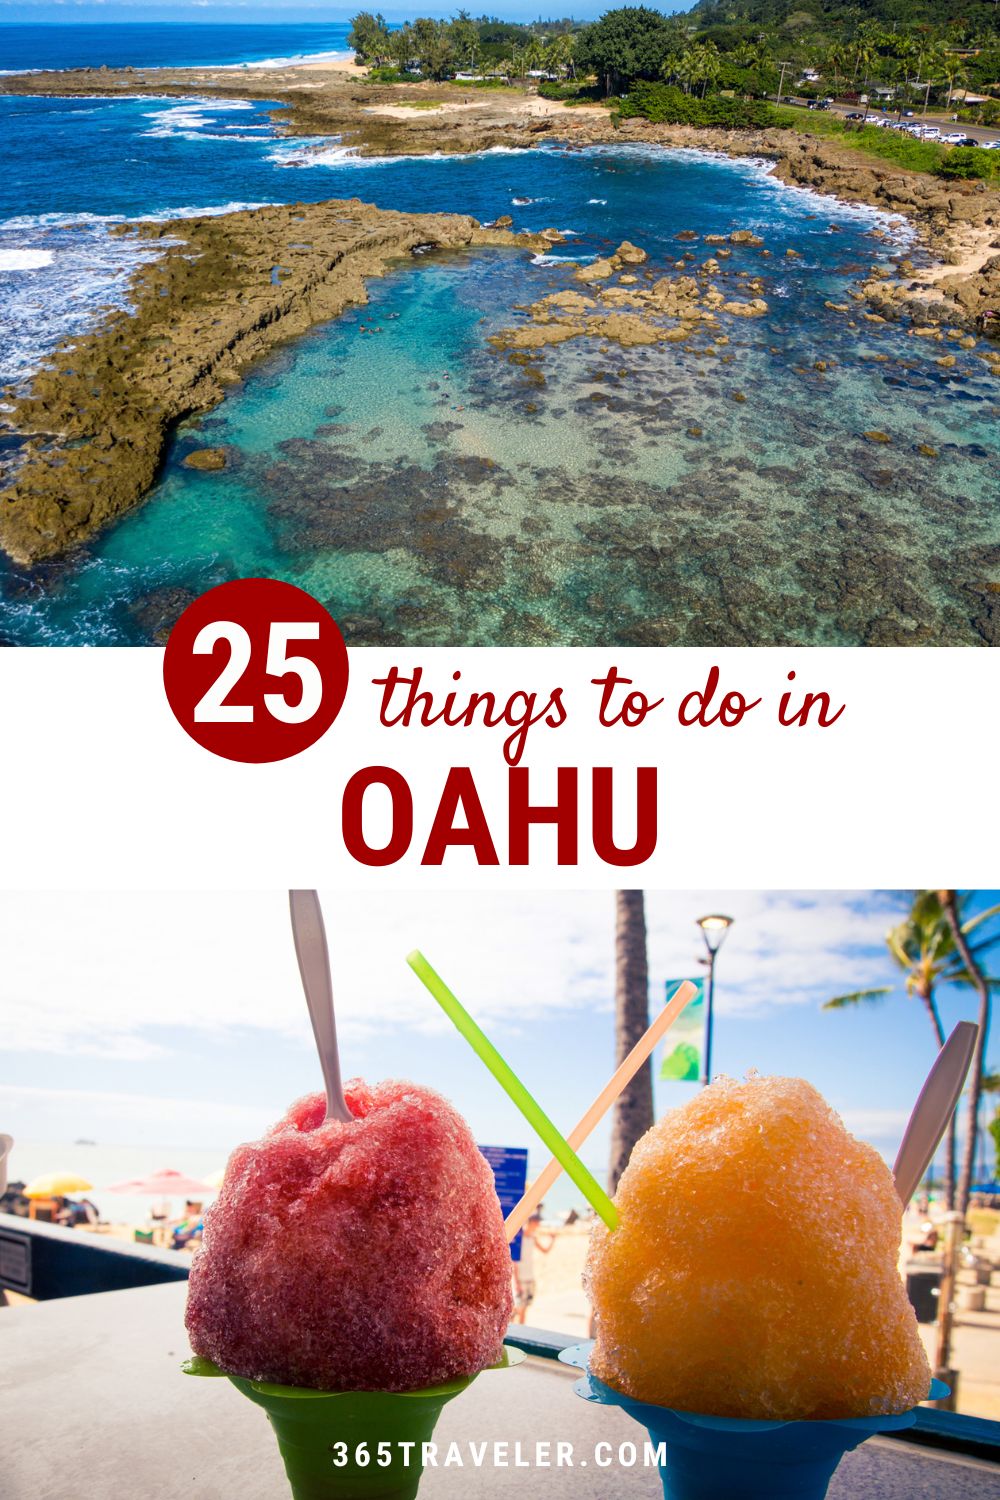 25 ABSOLUTE BEST THINGS TO DO IN OAHU YOU'LL LOVE